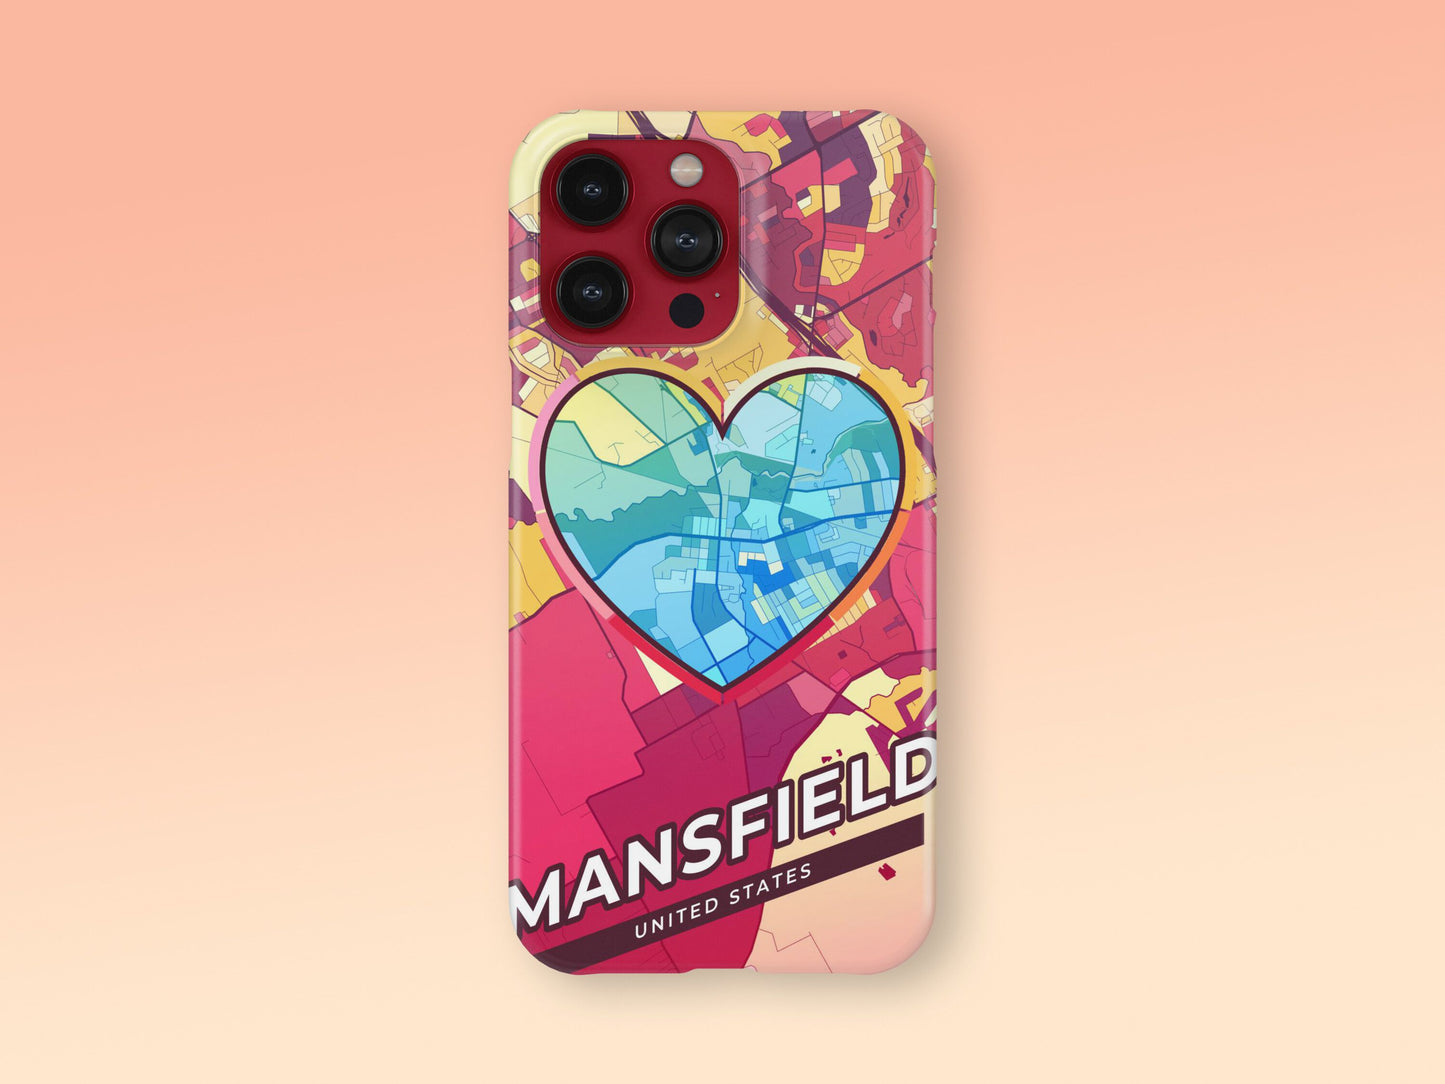 Mansfield Texas slim phone case with colorful icon. Birthday, wedding or housewarming gift. Couple match cases. 2